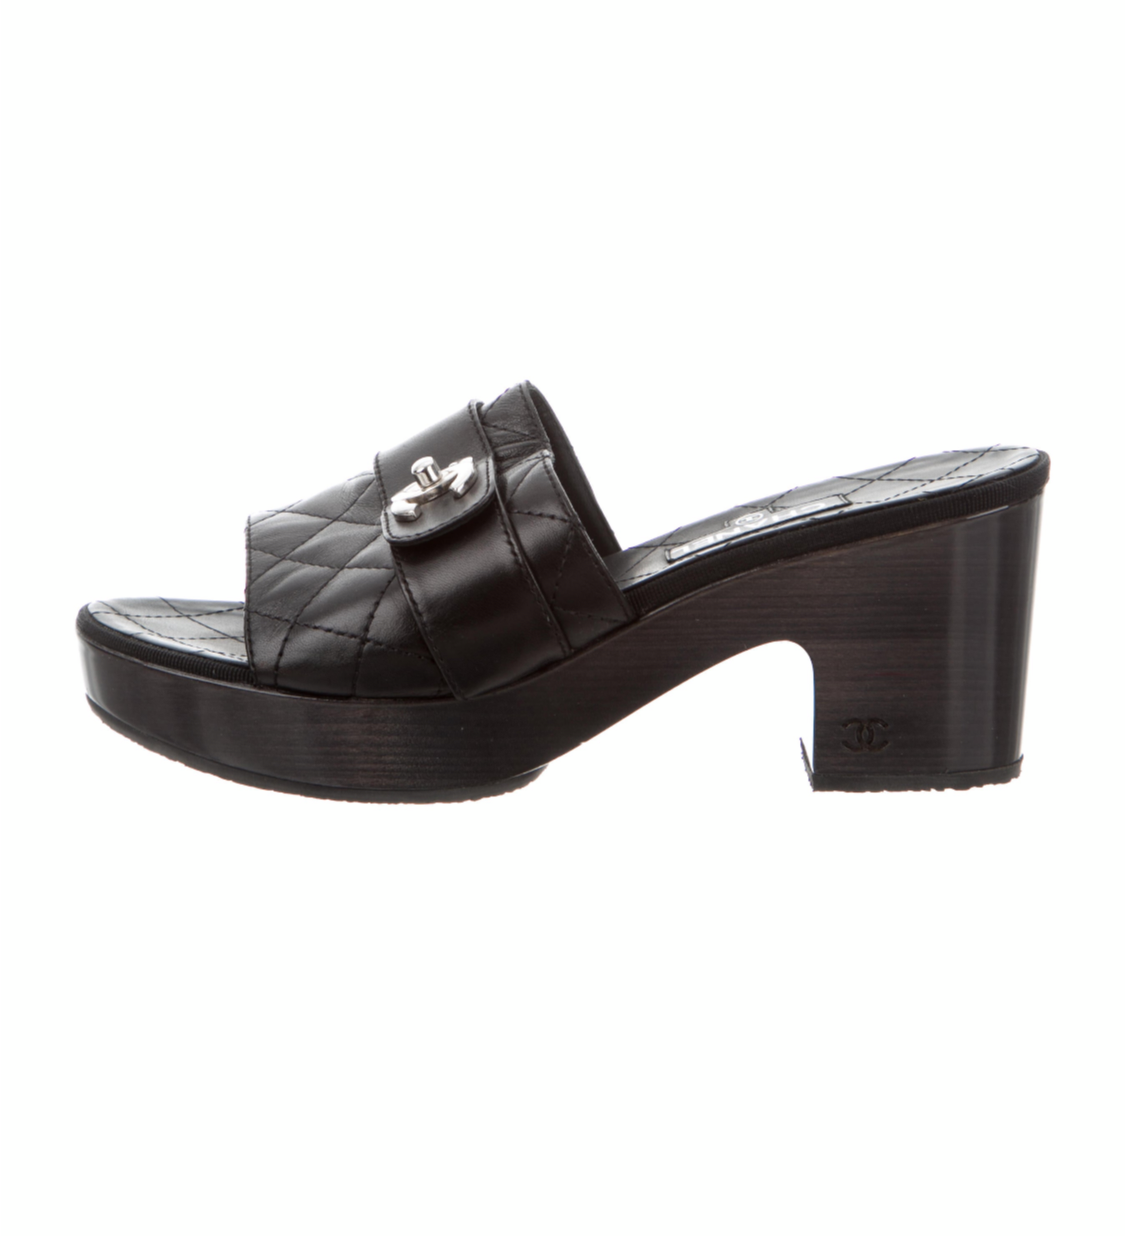 CHANEL Black Slides. Chanel Quilted Leather Slides Mules Size